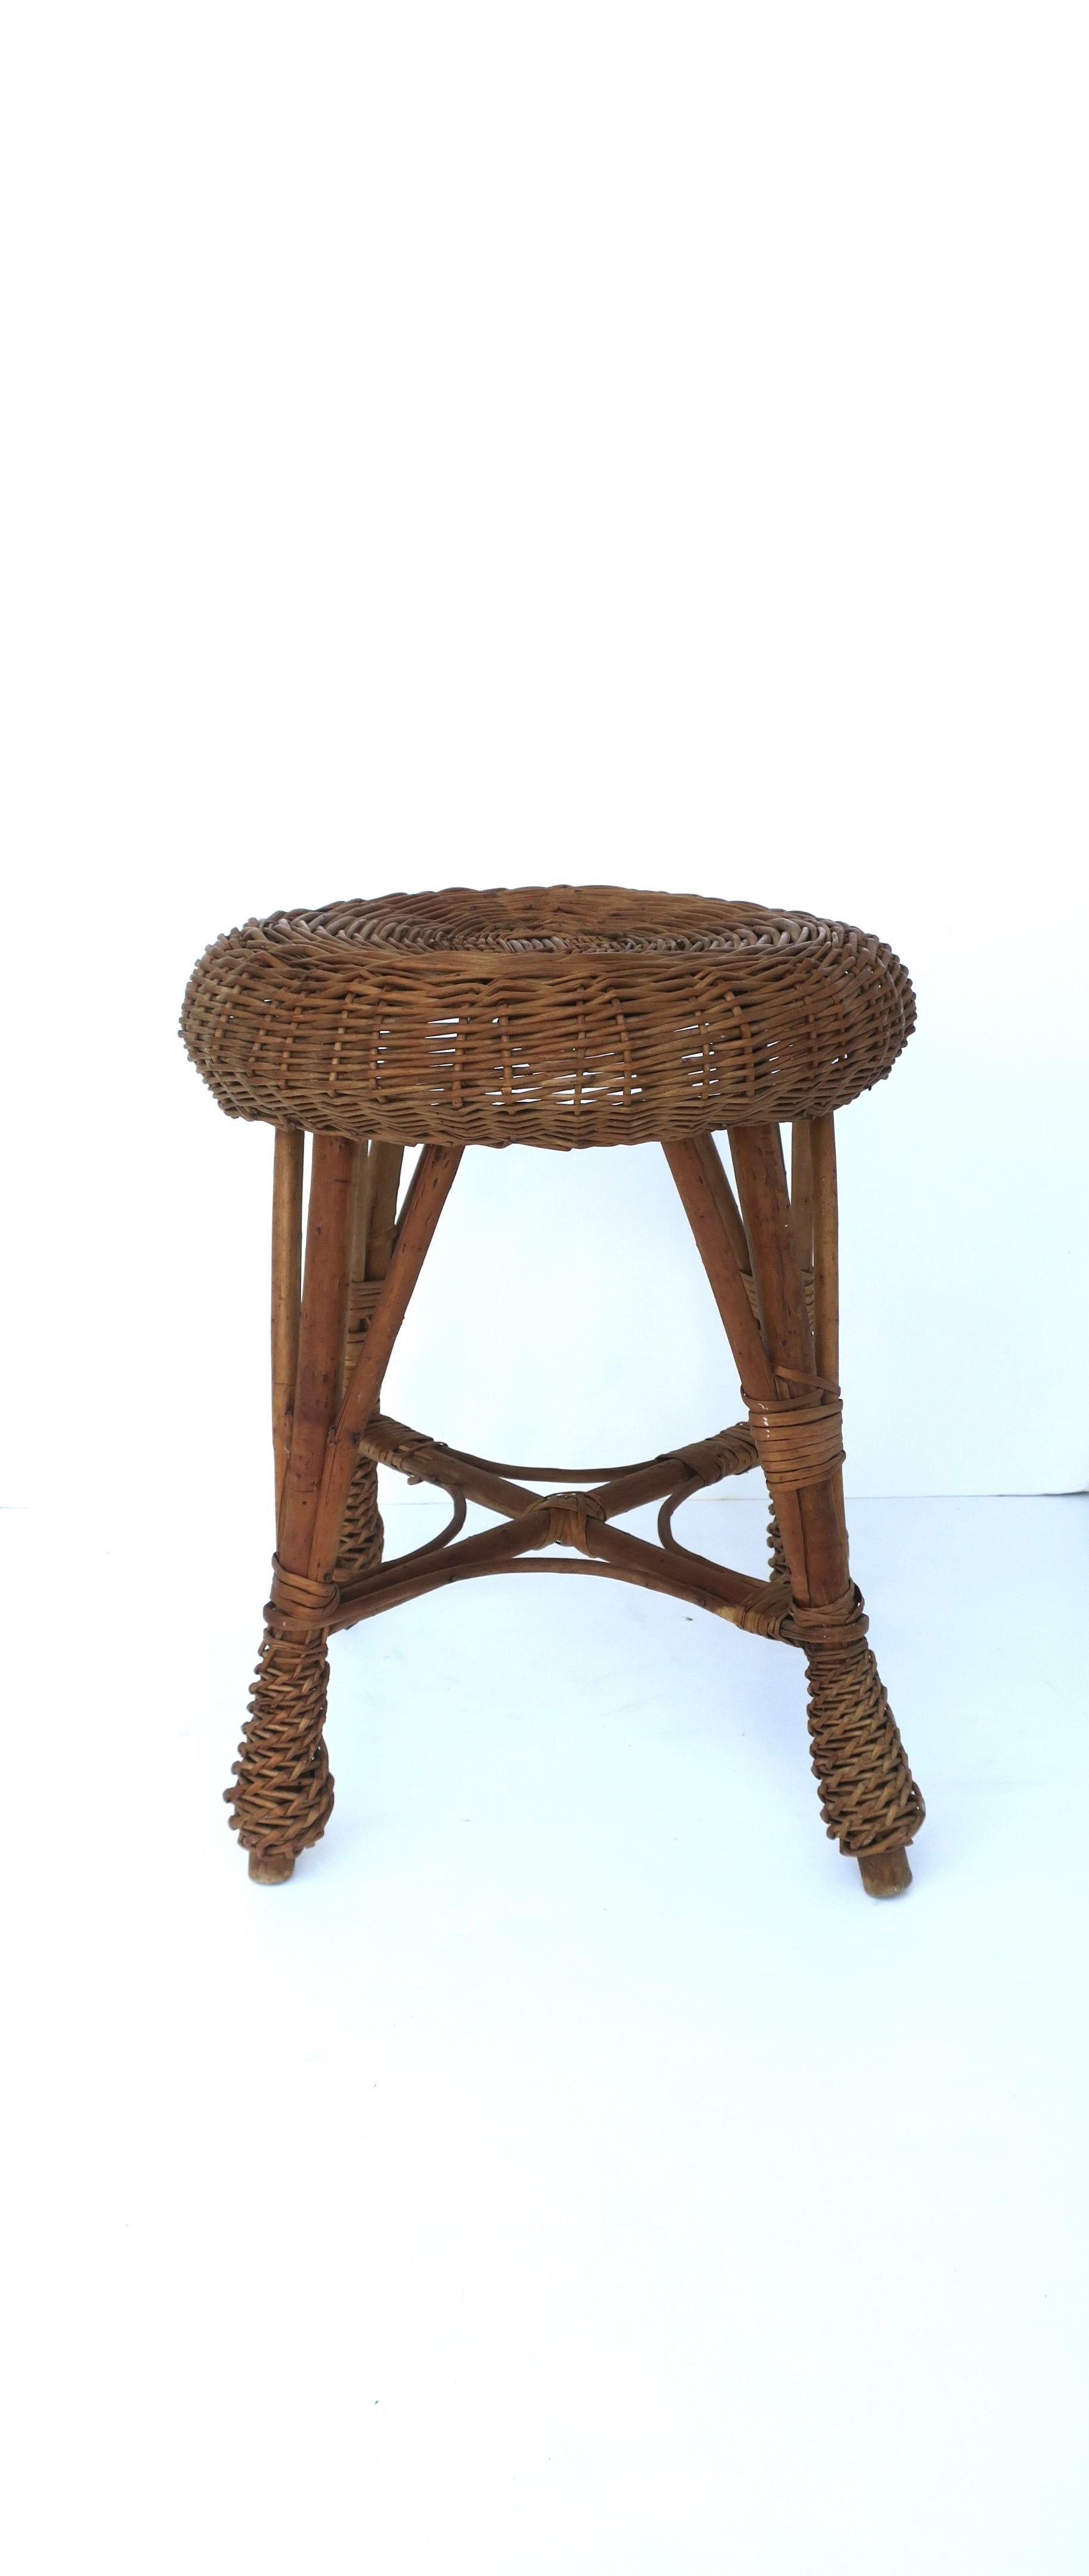 A vintage round wicker stool, circa mid-20th century. Great as a stool (it's intended use), as a drink table, a small stool/table for a bath area, to display books, plant stand, etc. Many uses. Piece works as a side/drink table providing there's a